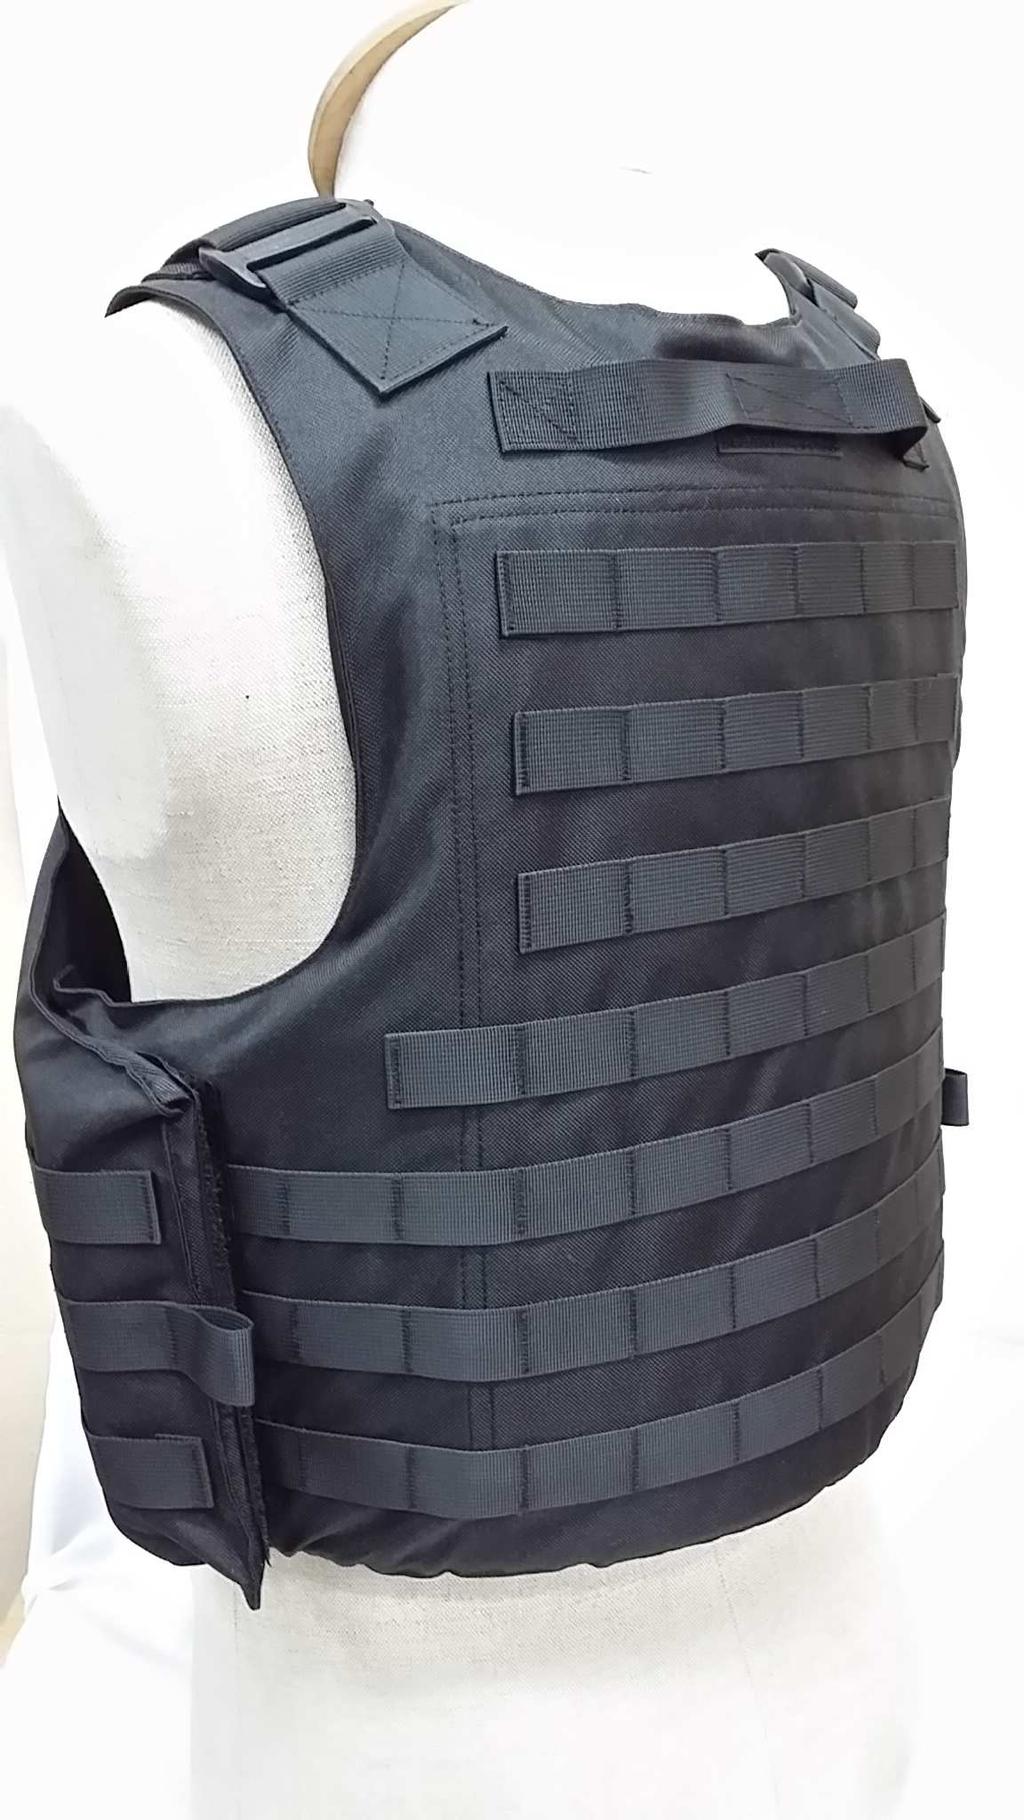 M/ BODY ARMOUR VESTS NIJ PROTECTION: PROTECTION: IIIA-0101,06 357 SIG FMJ FN 125gr,44 Magnum SJHP 240gr FRONT VIEW MATERIAL Tactical 8404V3 Bodyarmour Oxford 600 Denier *Soft panels with large